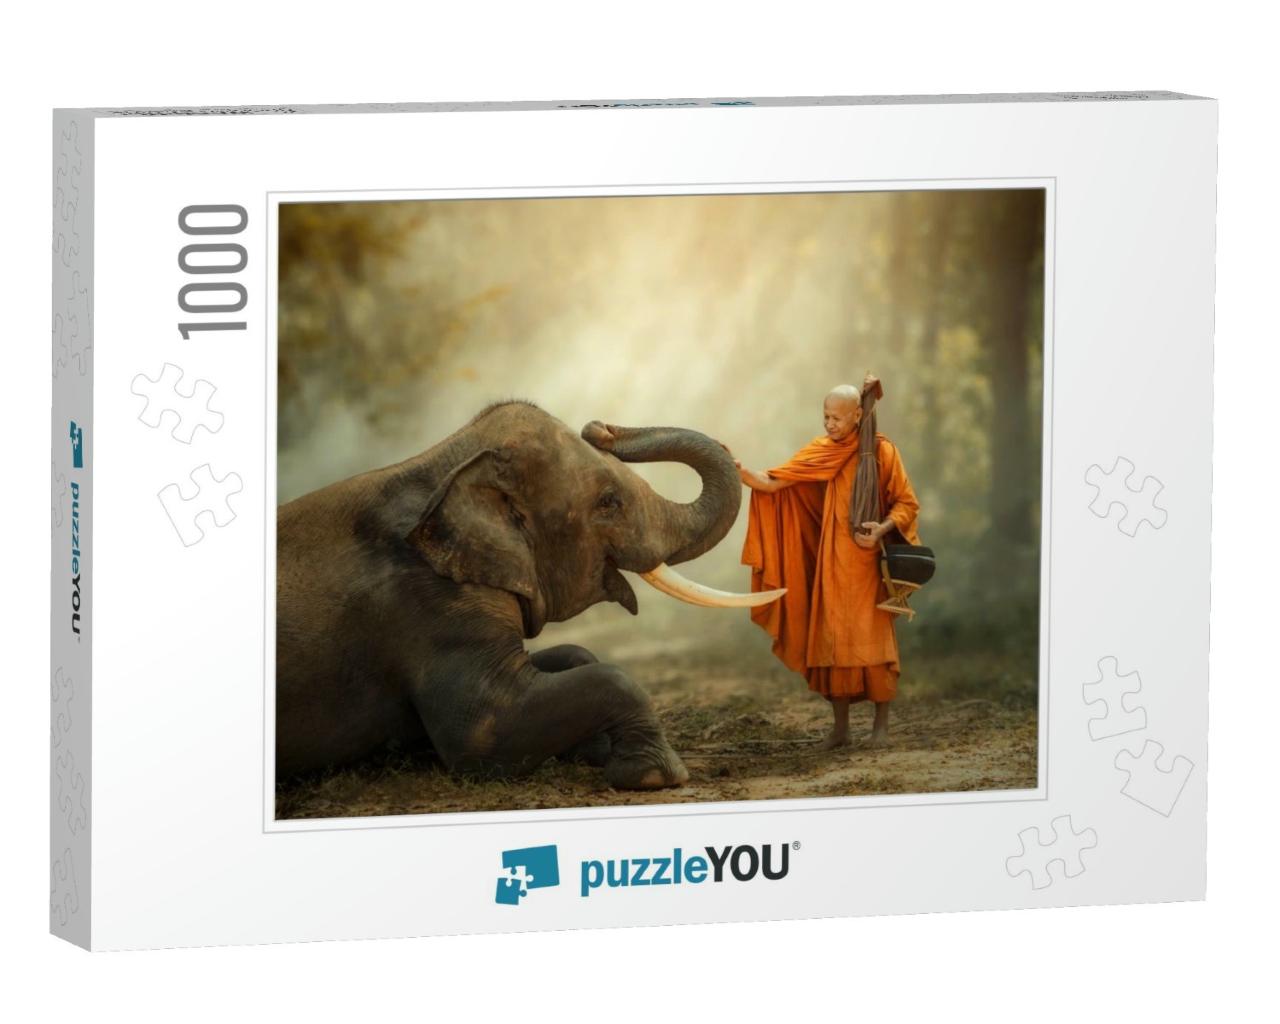 Monk Walking Hiking with Canny Elephant in Forest... Jigsaw Puzzle with 1000 pieces